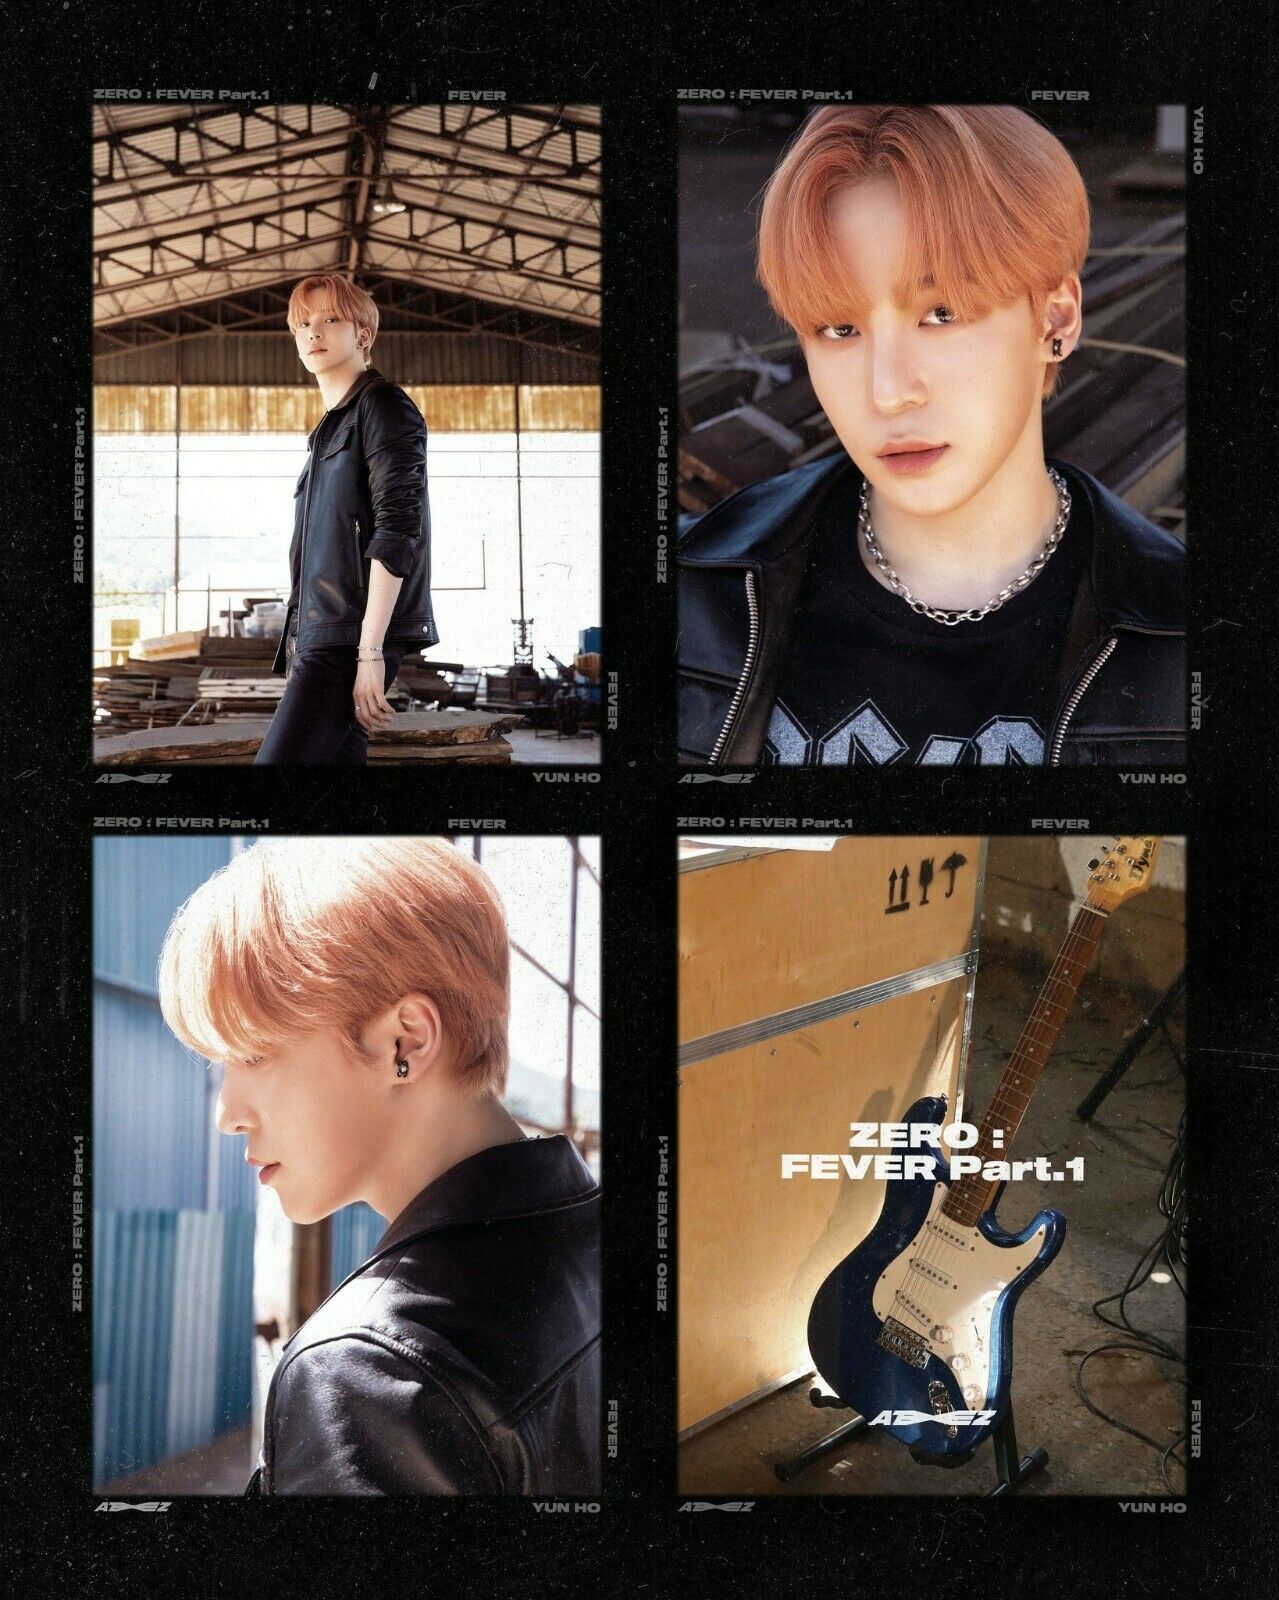 1 CD
1 Photo Booklet (112 pages)
1 Sticker
1 Postcard Set (9 cards)
1 AR Photo Card (random out of 16 types)